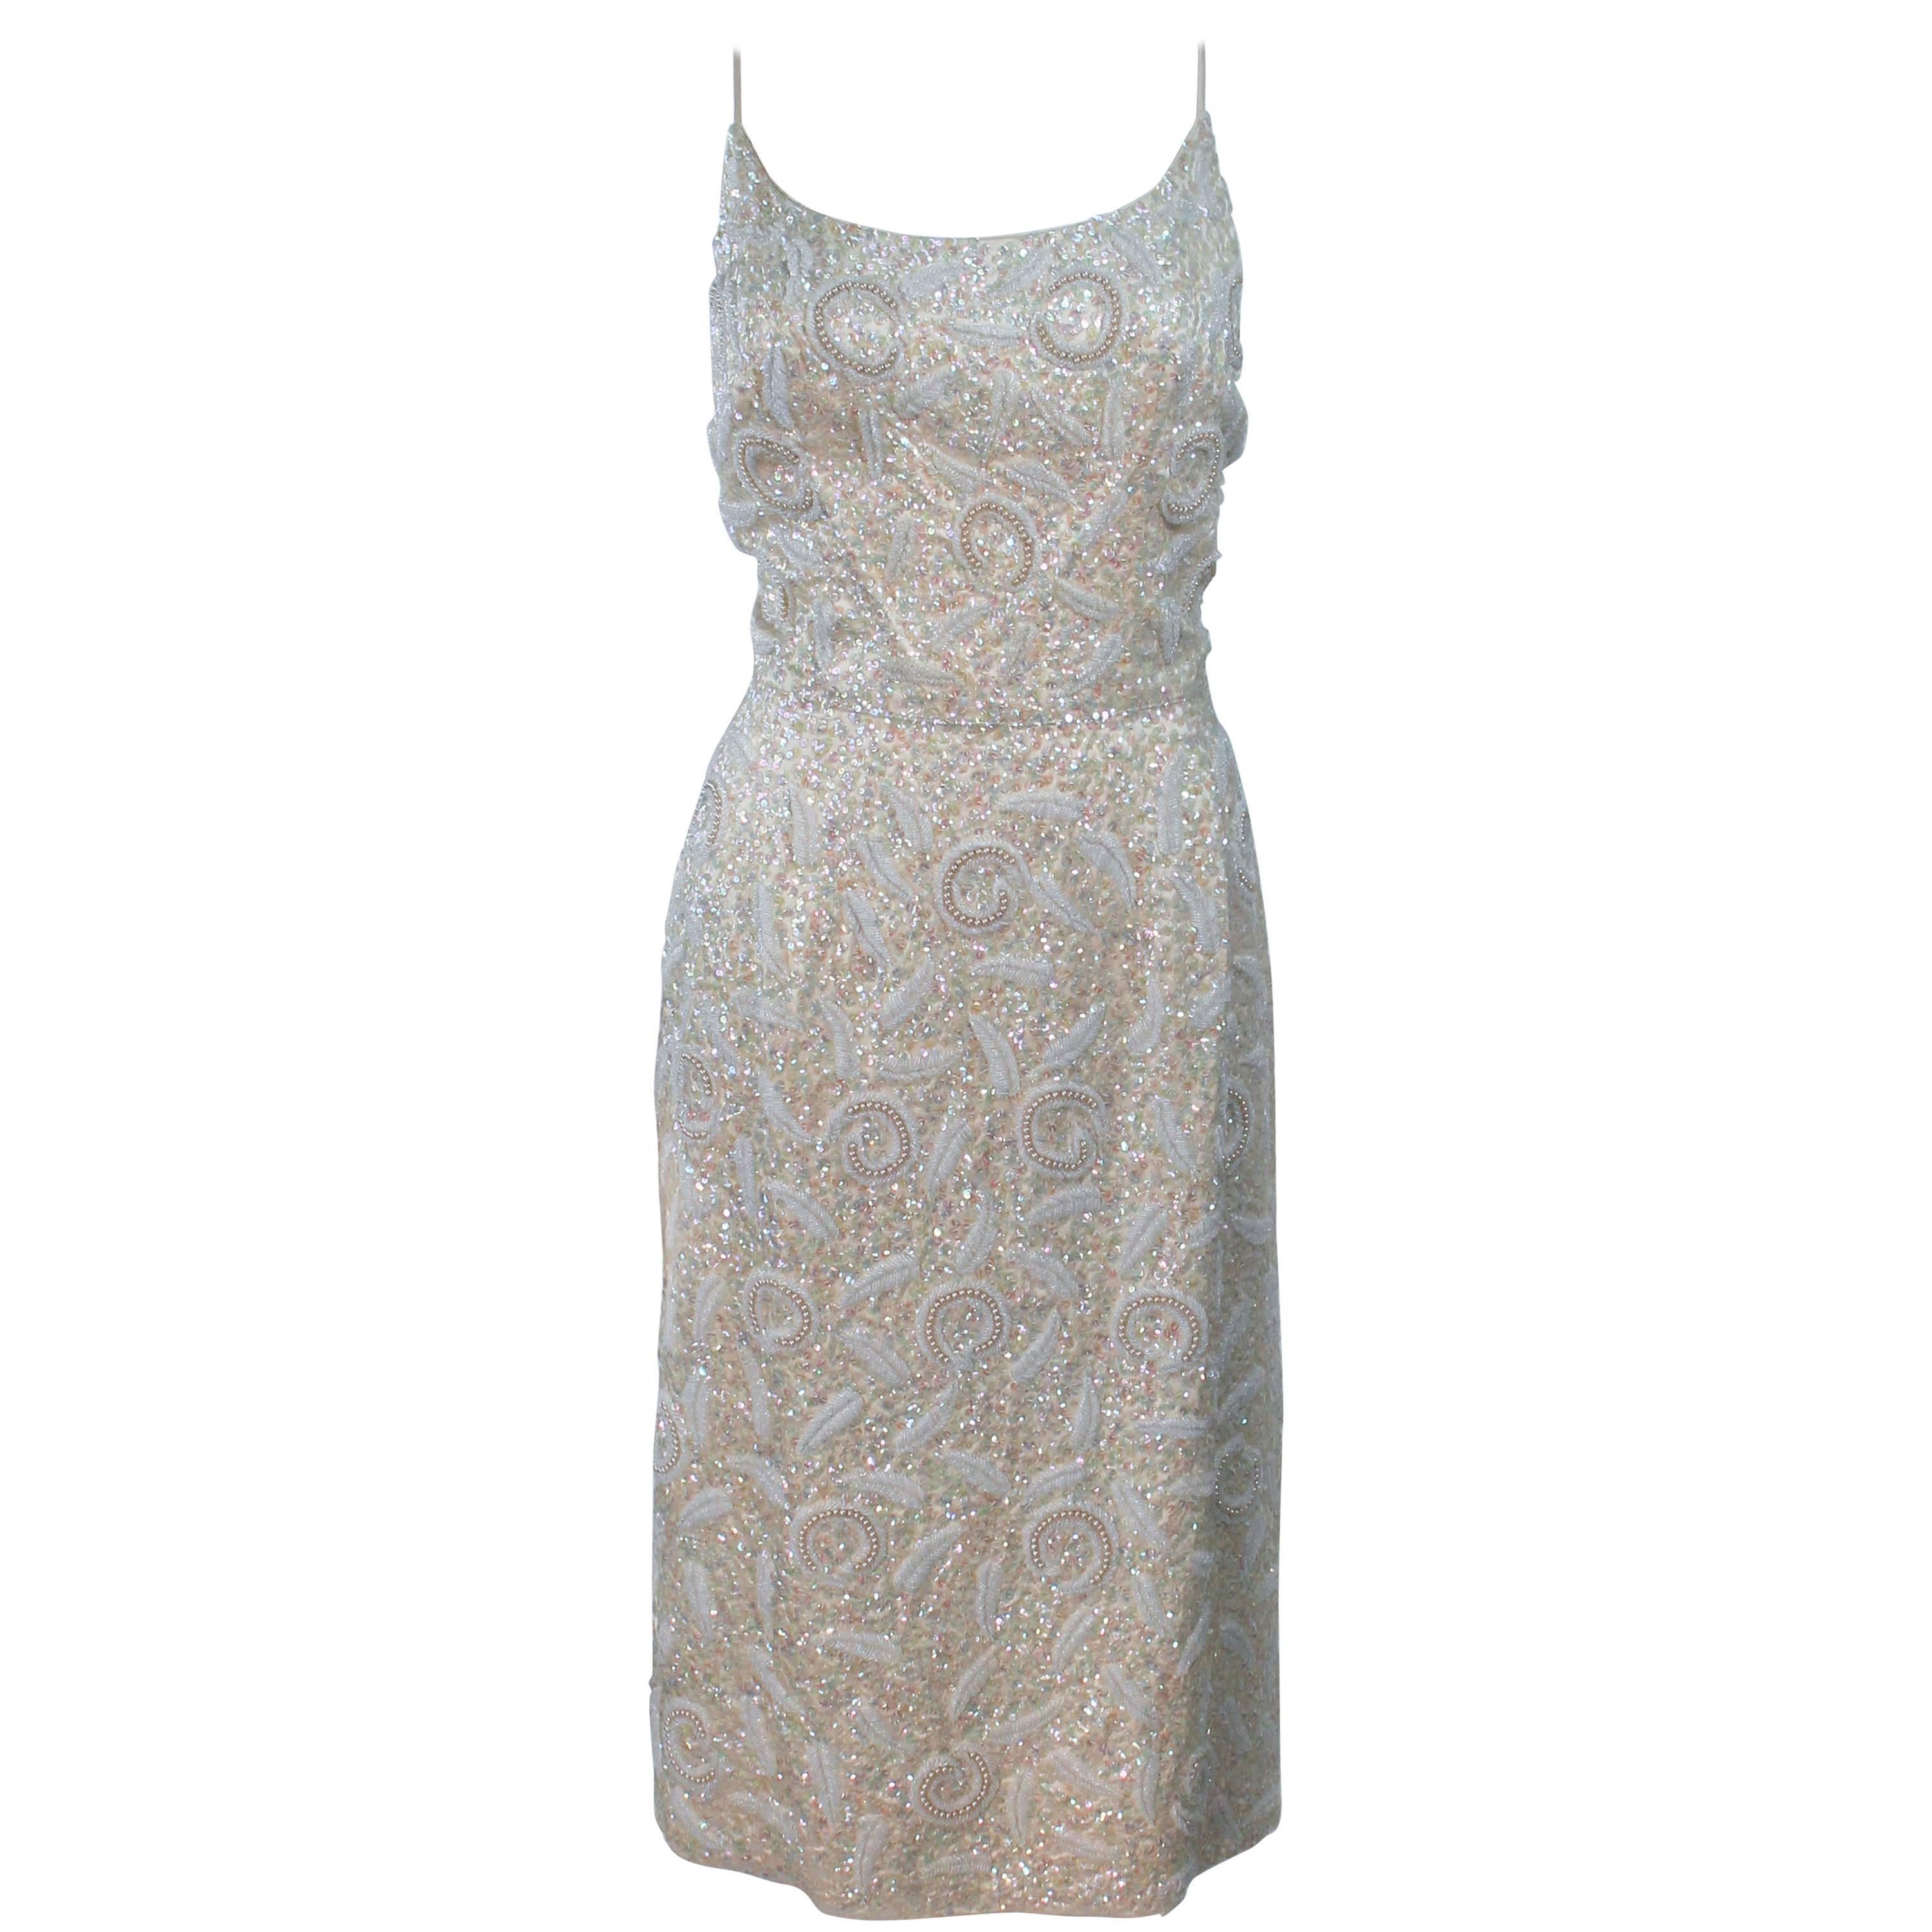 IMPERIAL HOUSE Silk Off White Iridescent Sequined Cocktail Dress Size 6 For Sale